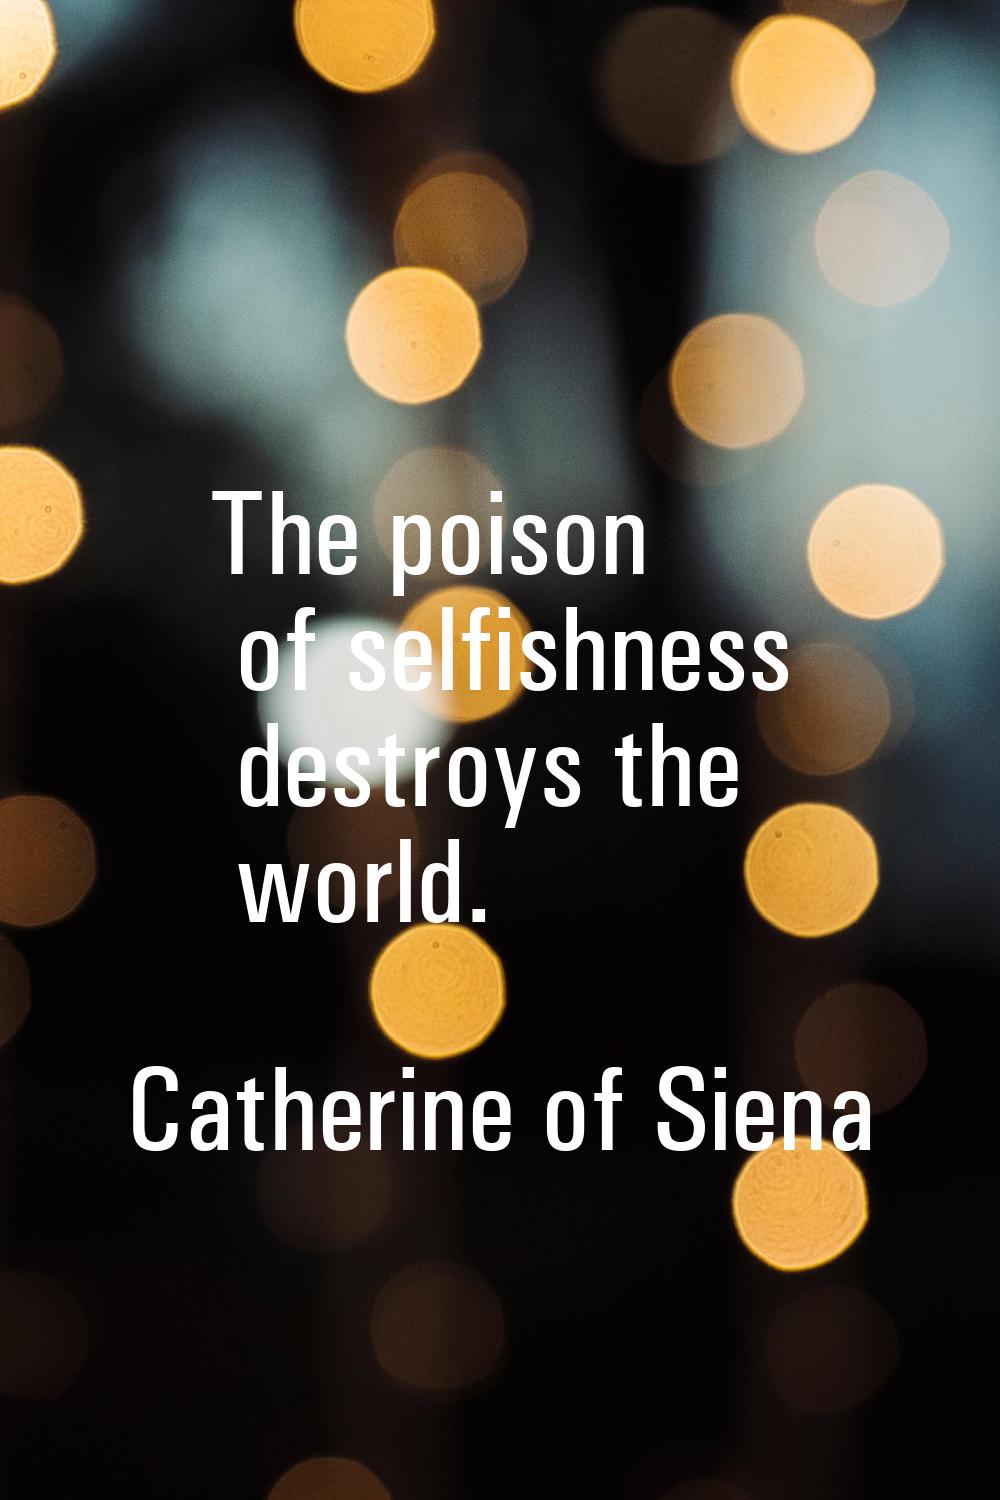 The poison of selfishness destroys the world.